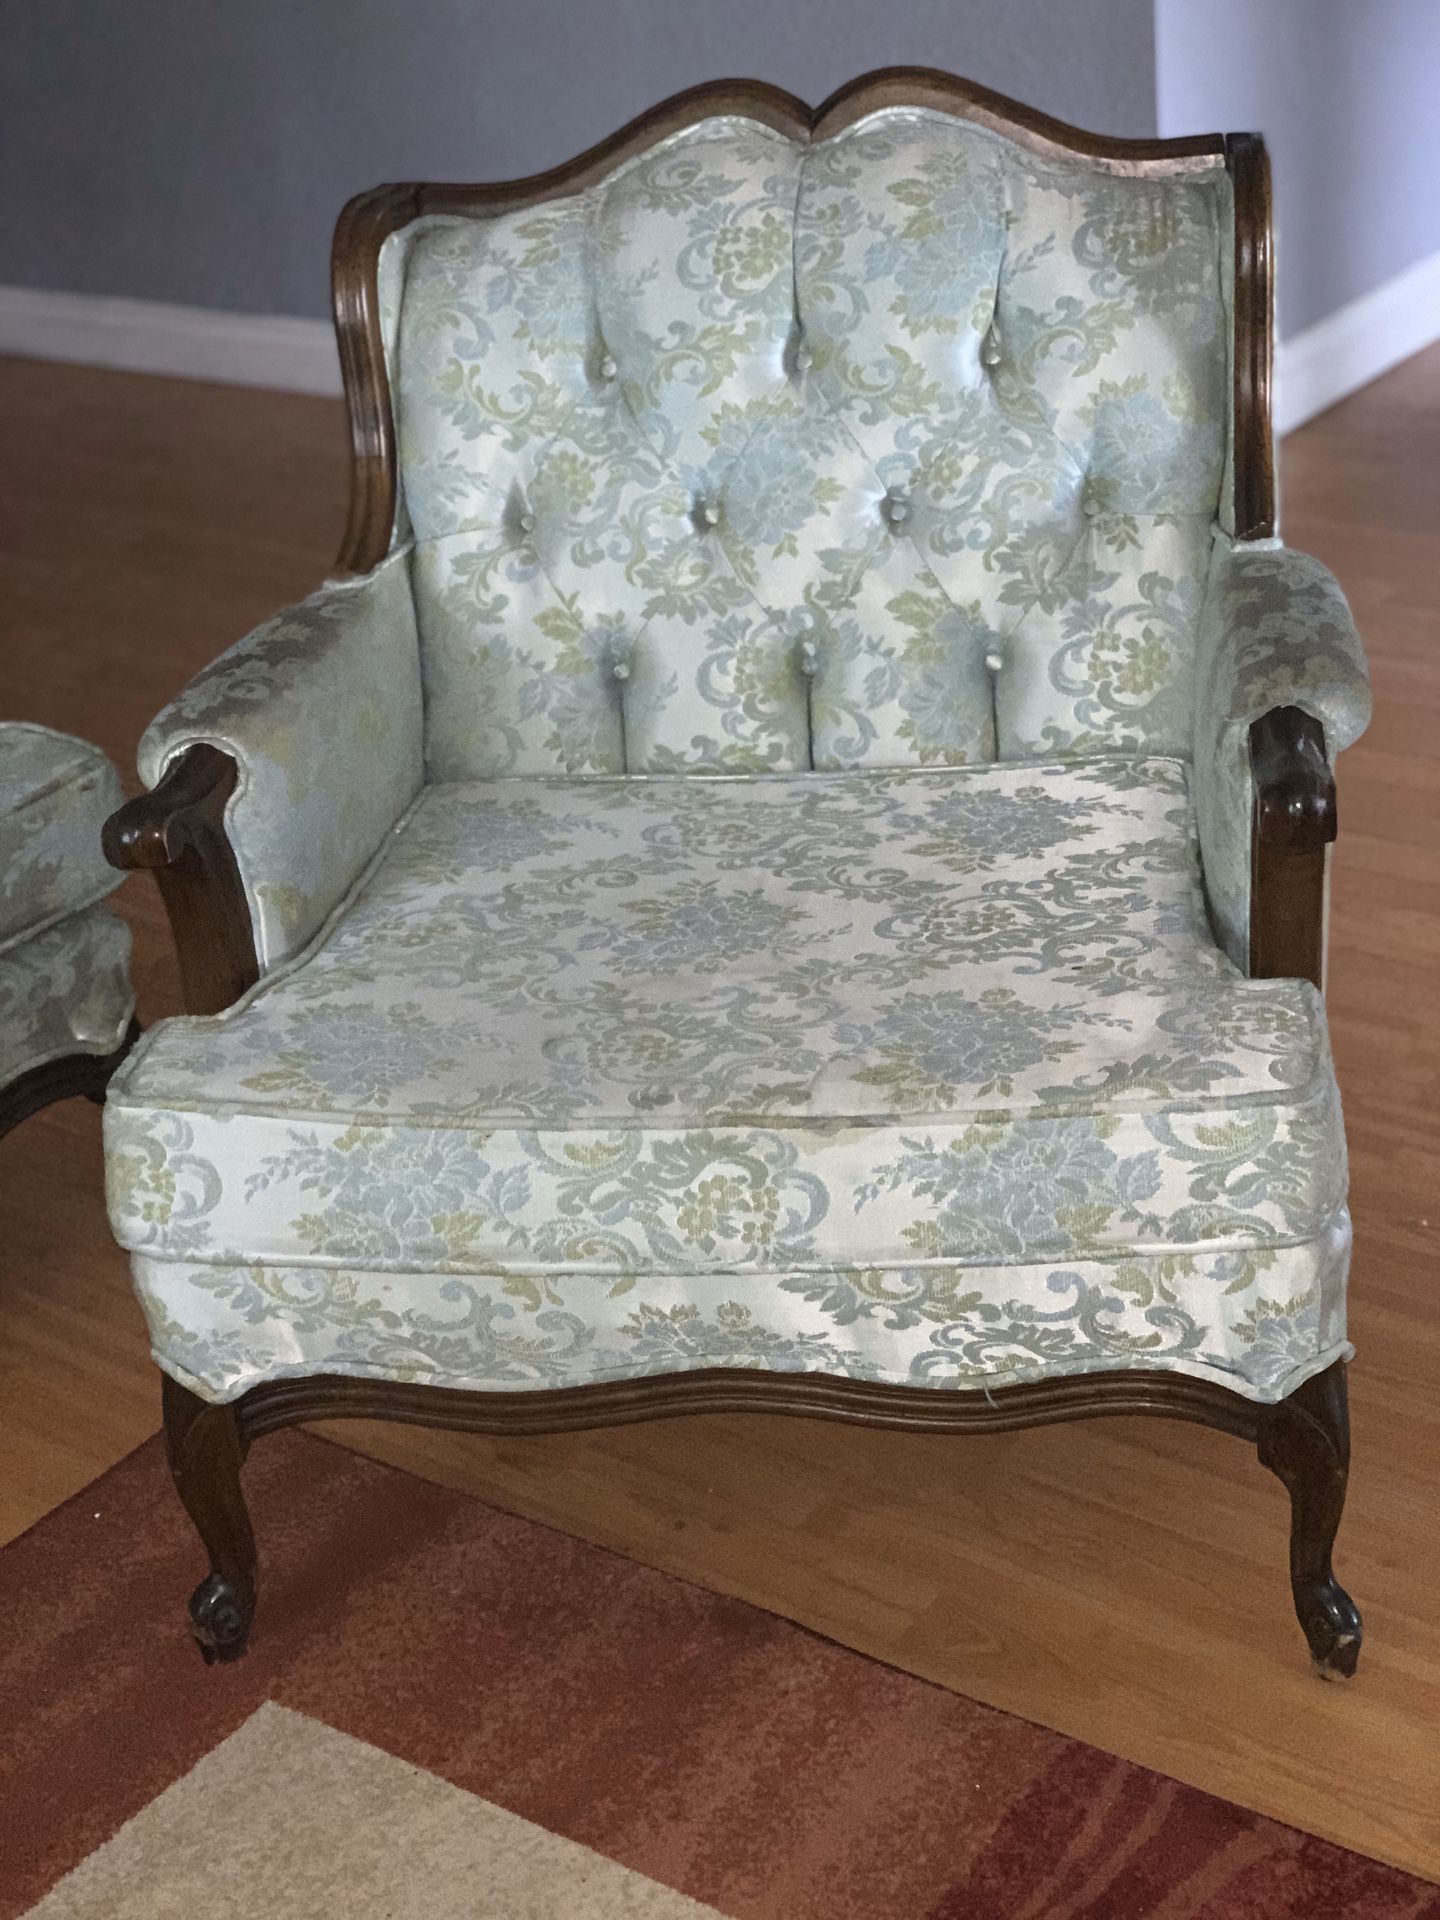 Antique French style sofa and chair and extra lg Rug, located in San Bernardino, CA 92407 FREE